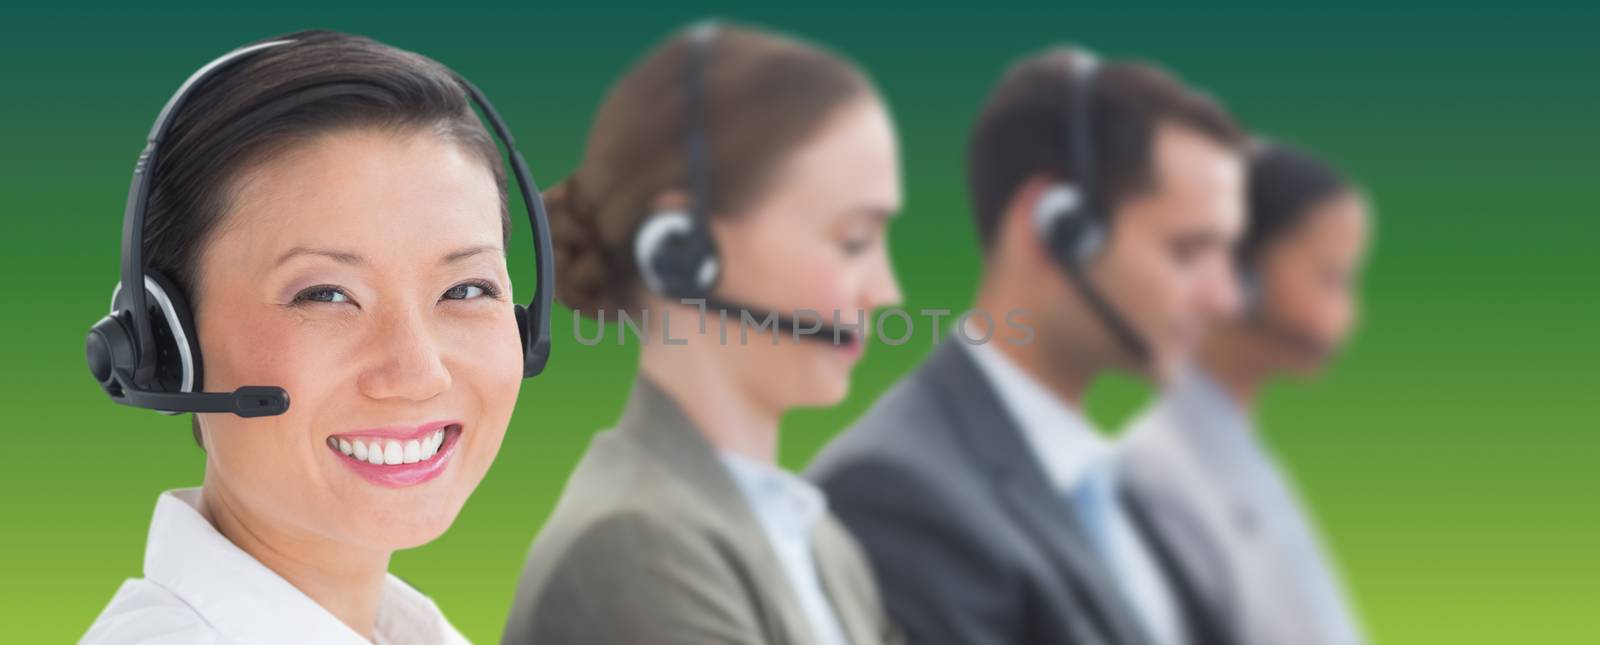 Business people with headsets using computers  against green abstract background